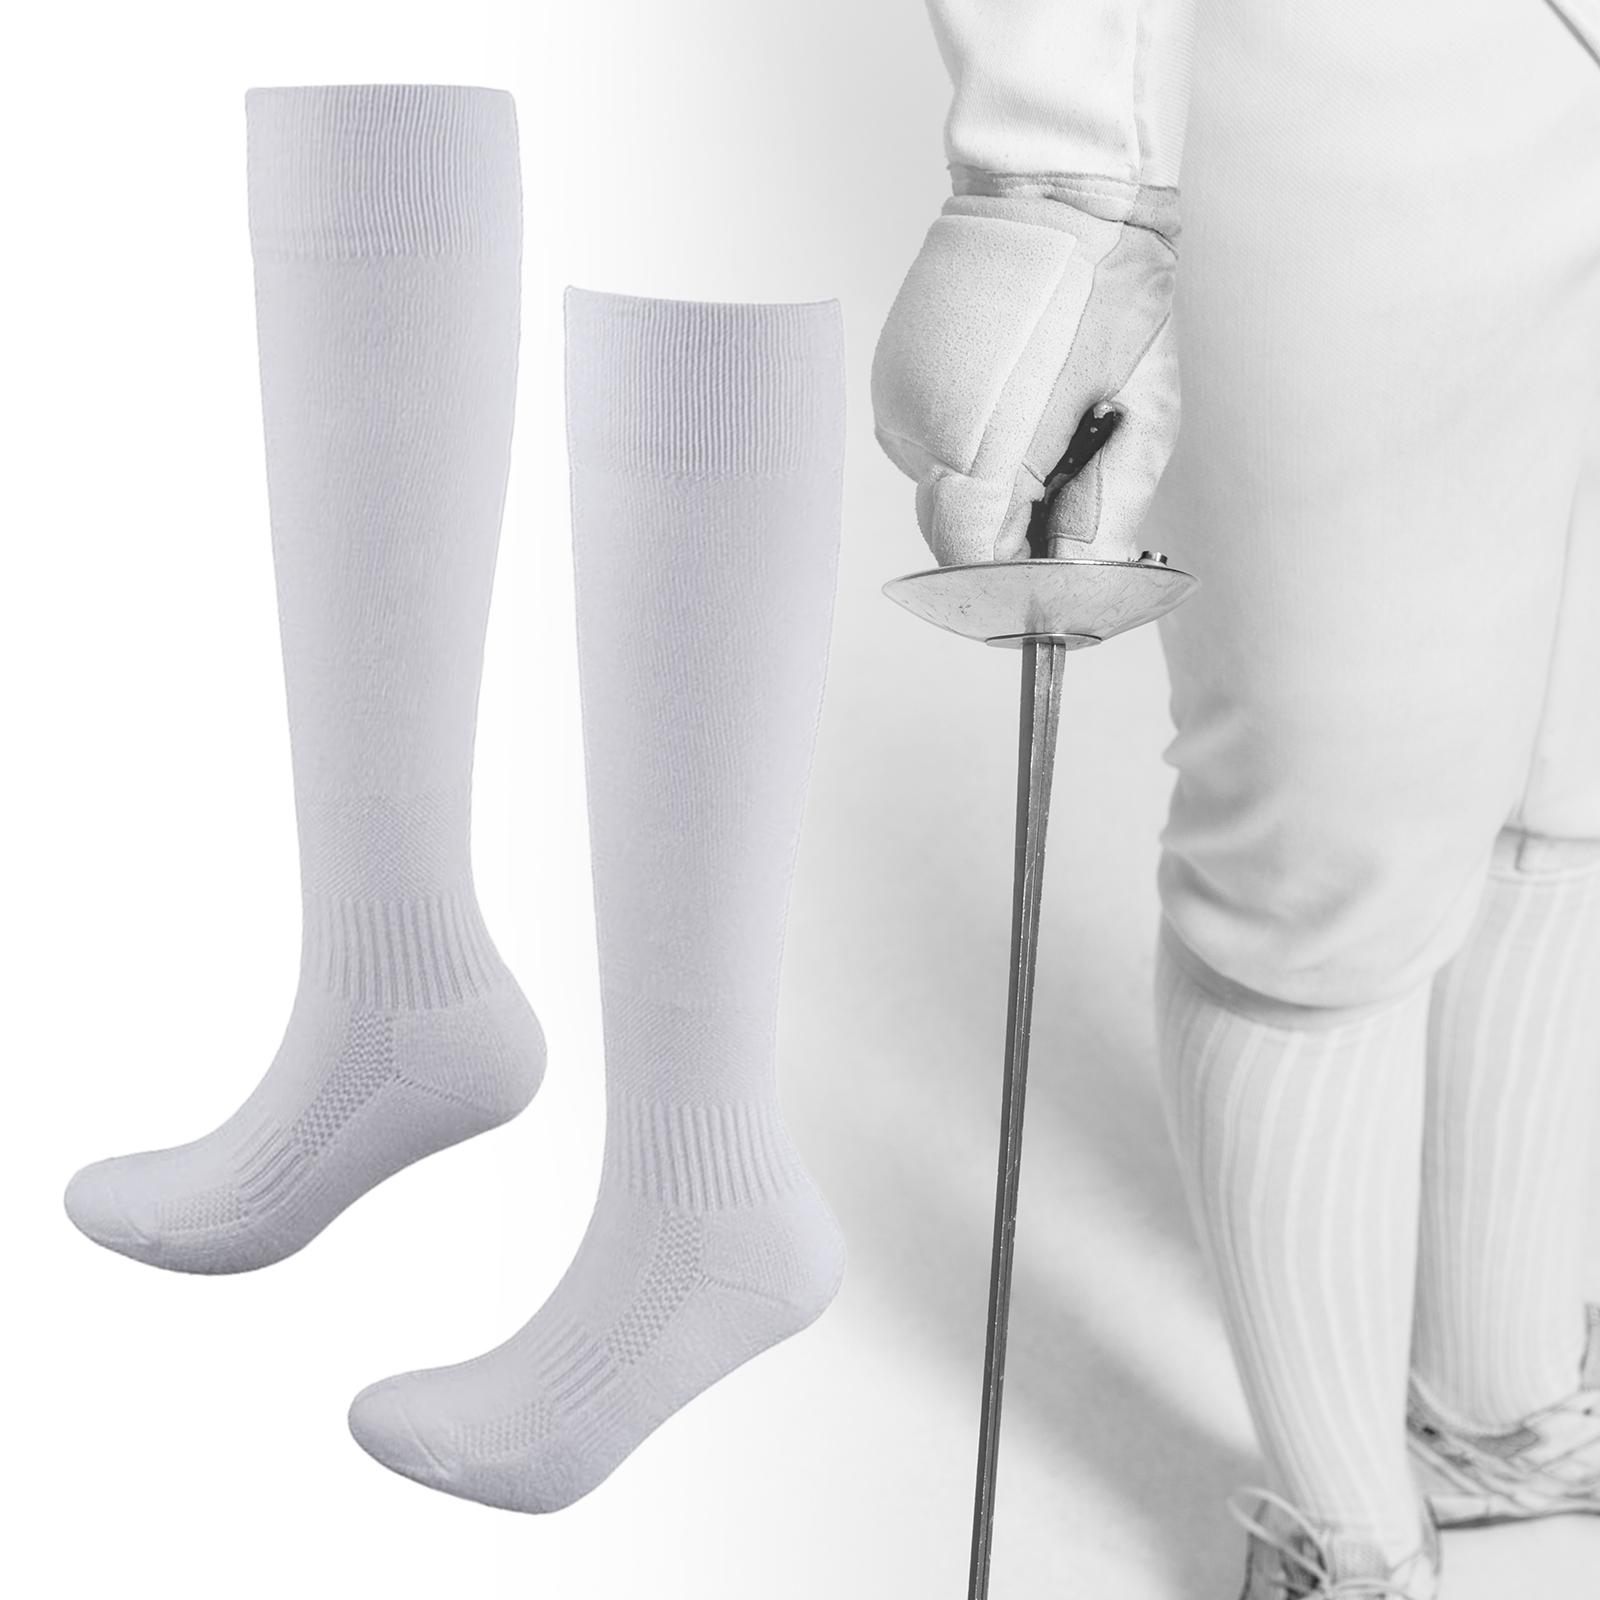 Fencing Socks Unisex Stretchy Unisex Fencing Stockings for Girls Adult S White 